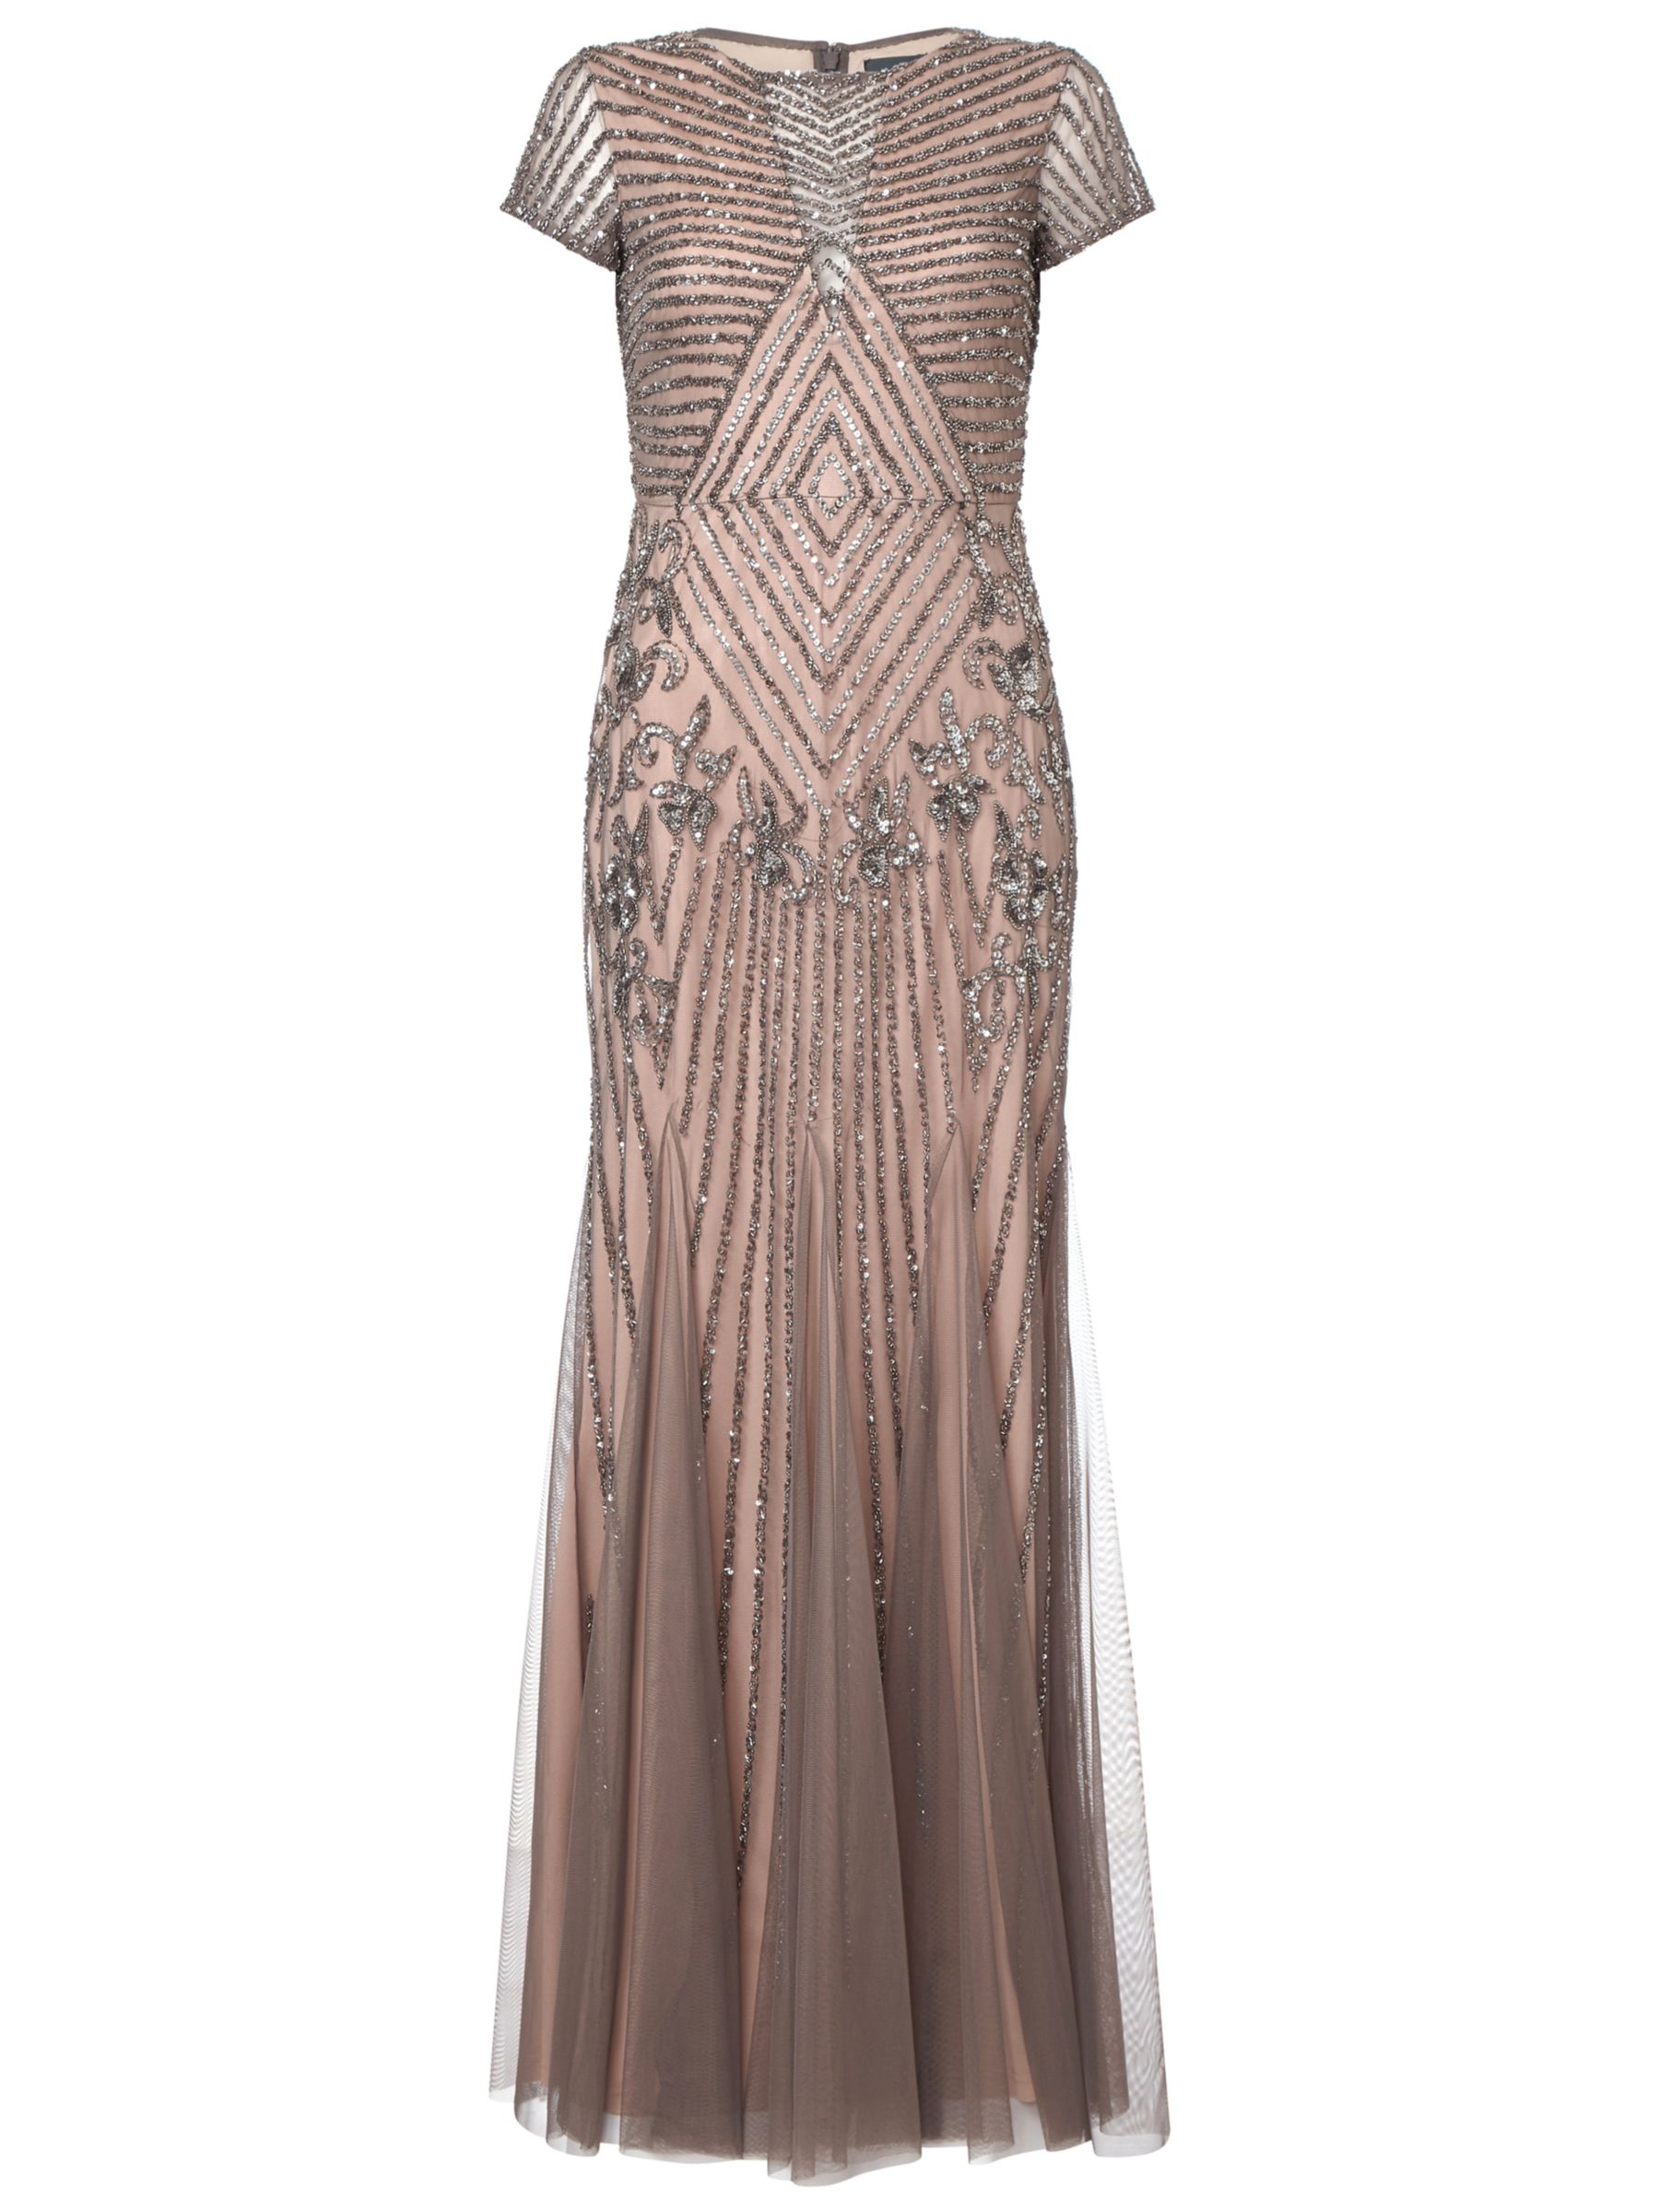 Adrianna Papell Short Sleeve Beaded Godet Gown Leadnude At John Lewis And Partners